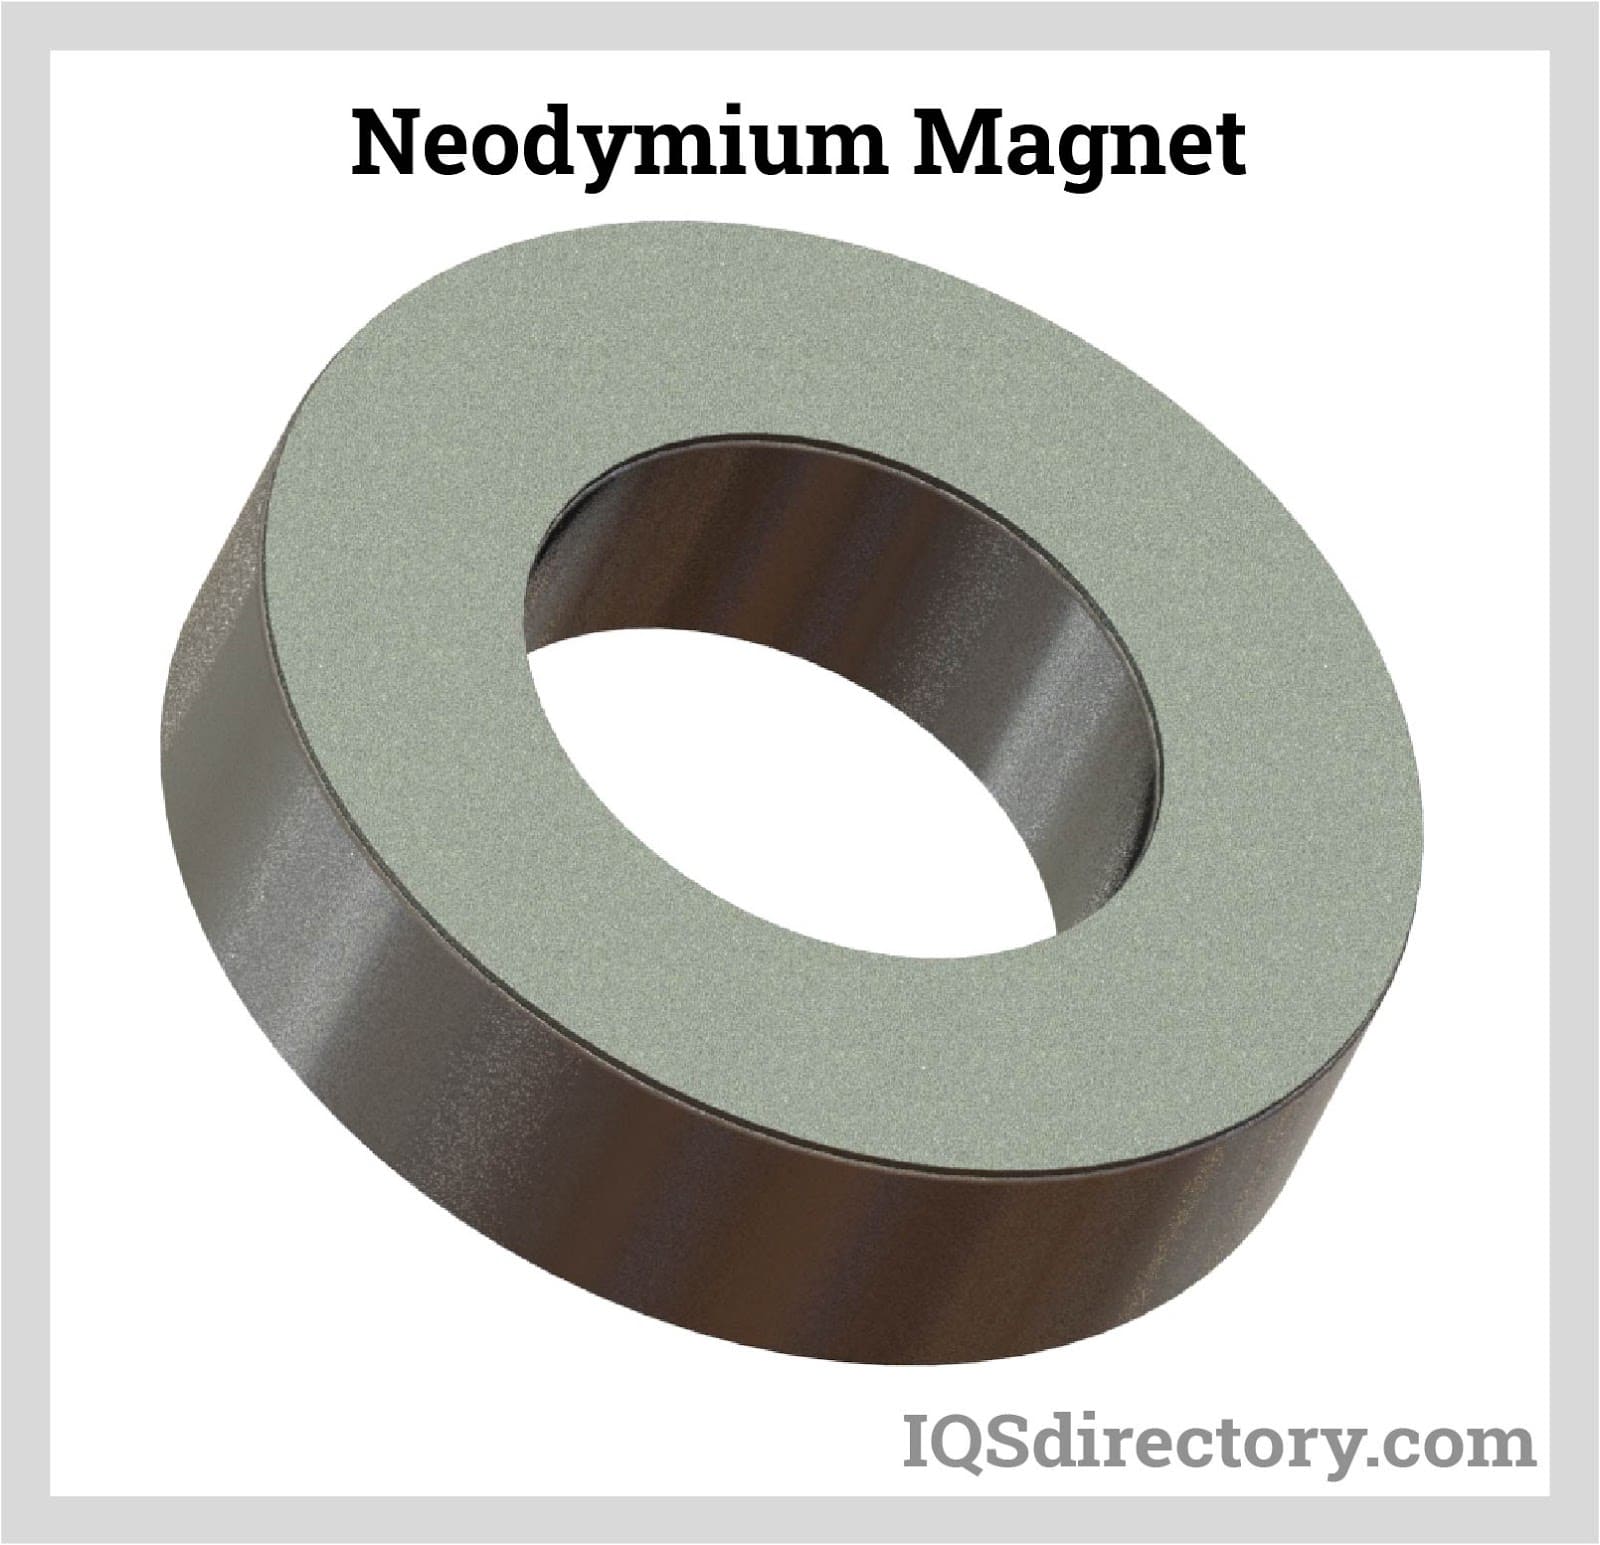 How to Make a Rare Earth Magnet Jewelry Easily : 3 Steps (with